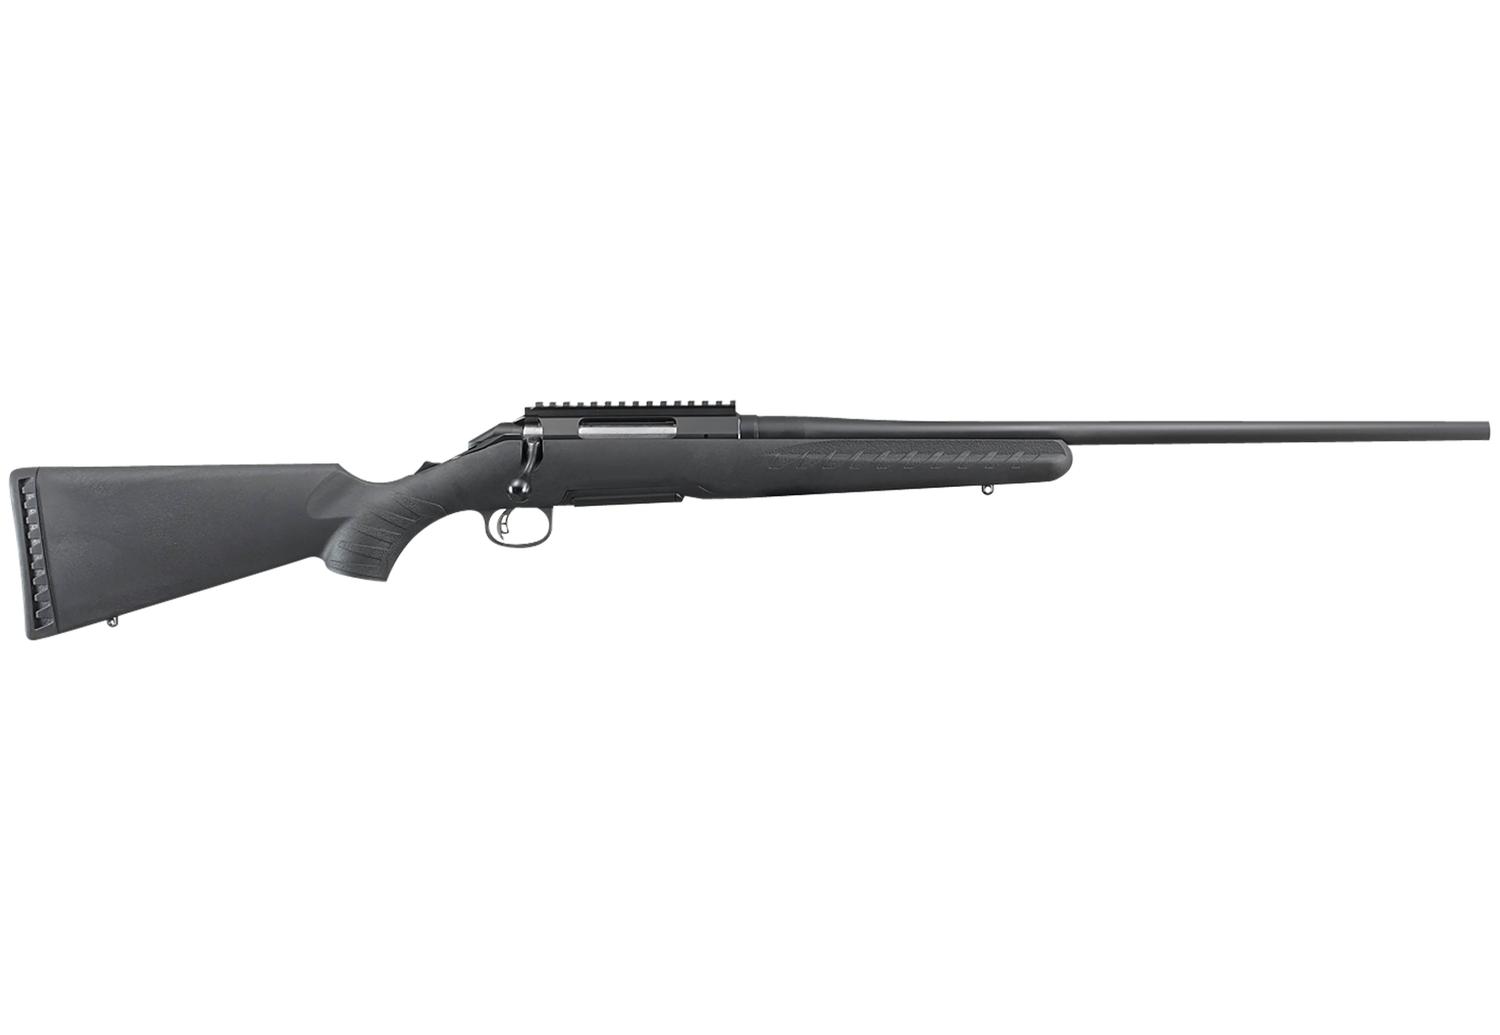  American .308win Bolt Action Rifle